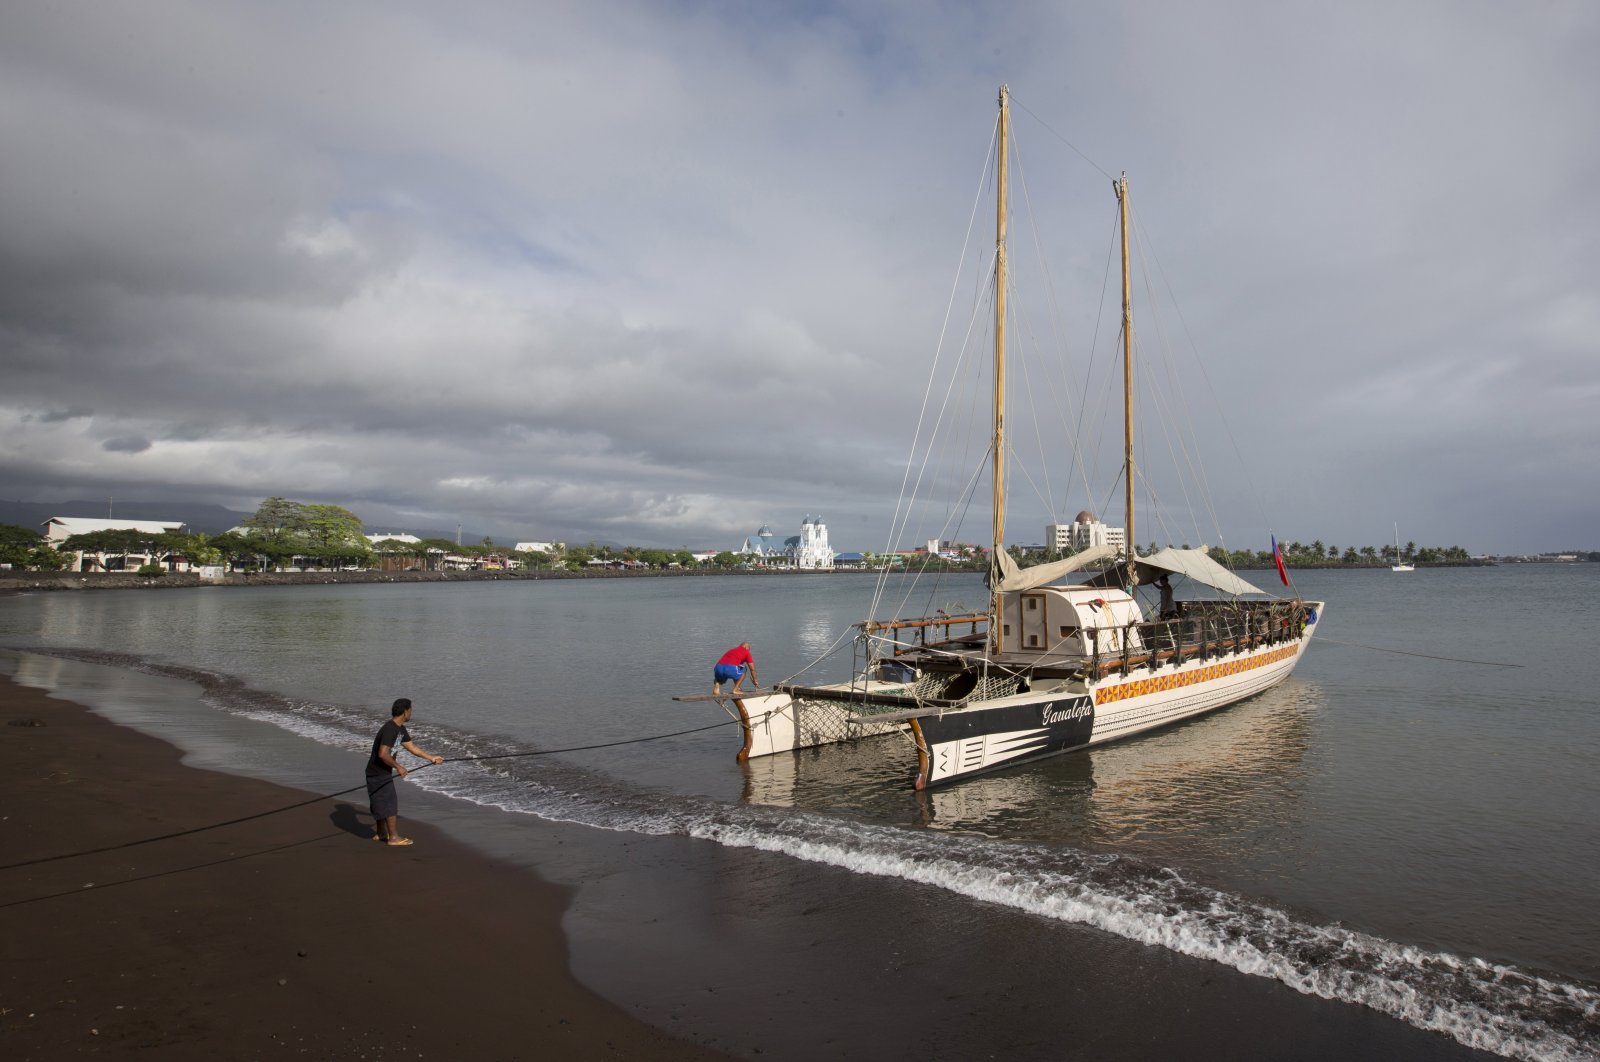 Traditional boat is located in Apia, Samoa, July 22, 2015. (AP Photo)